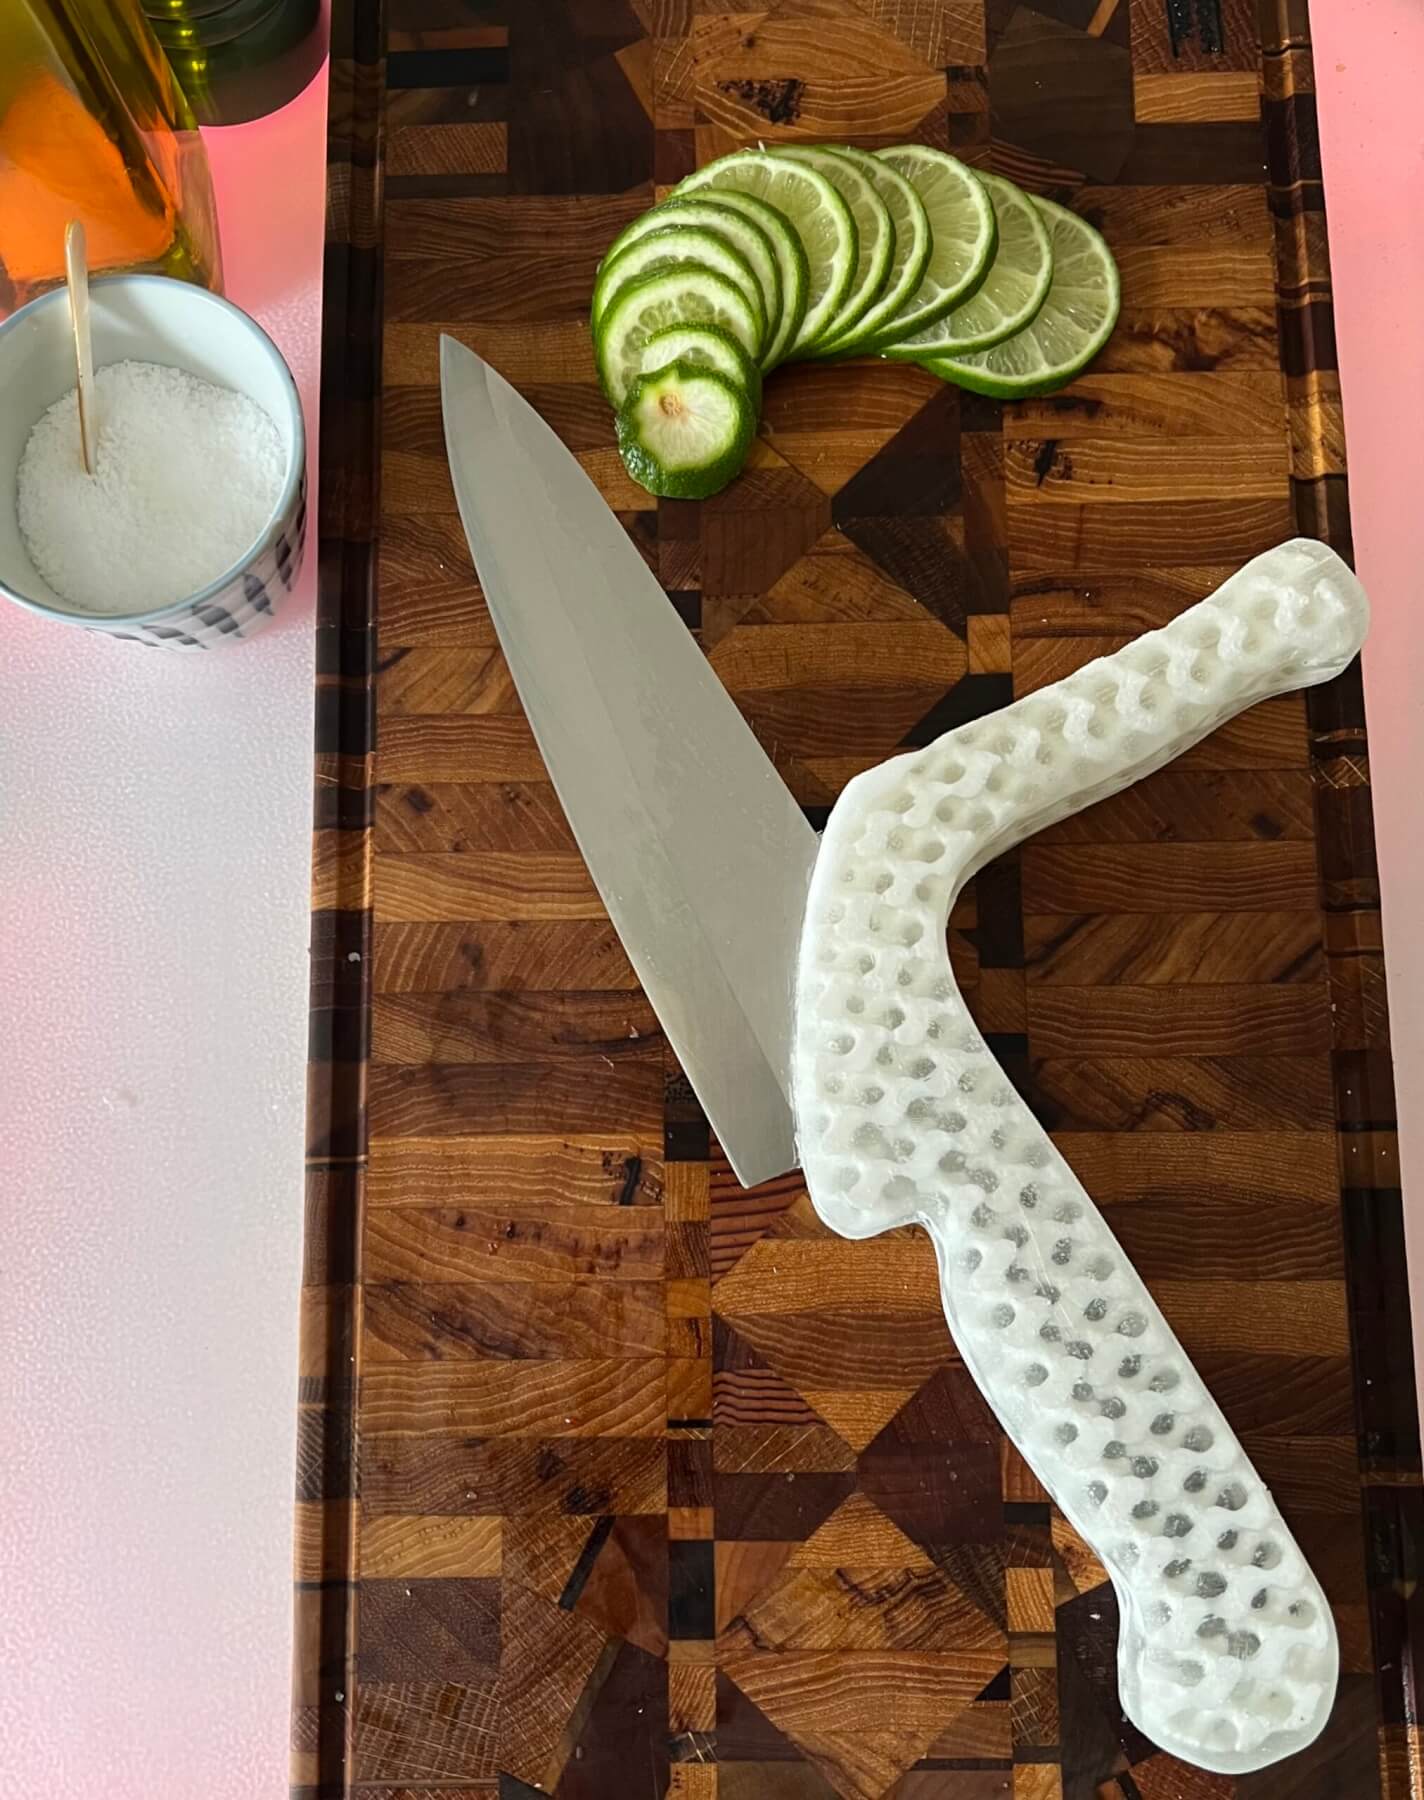 Adaptive knife on cutting board with sliced limes